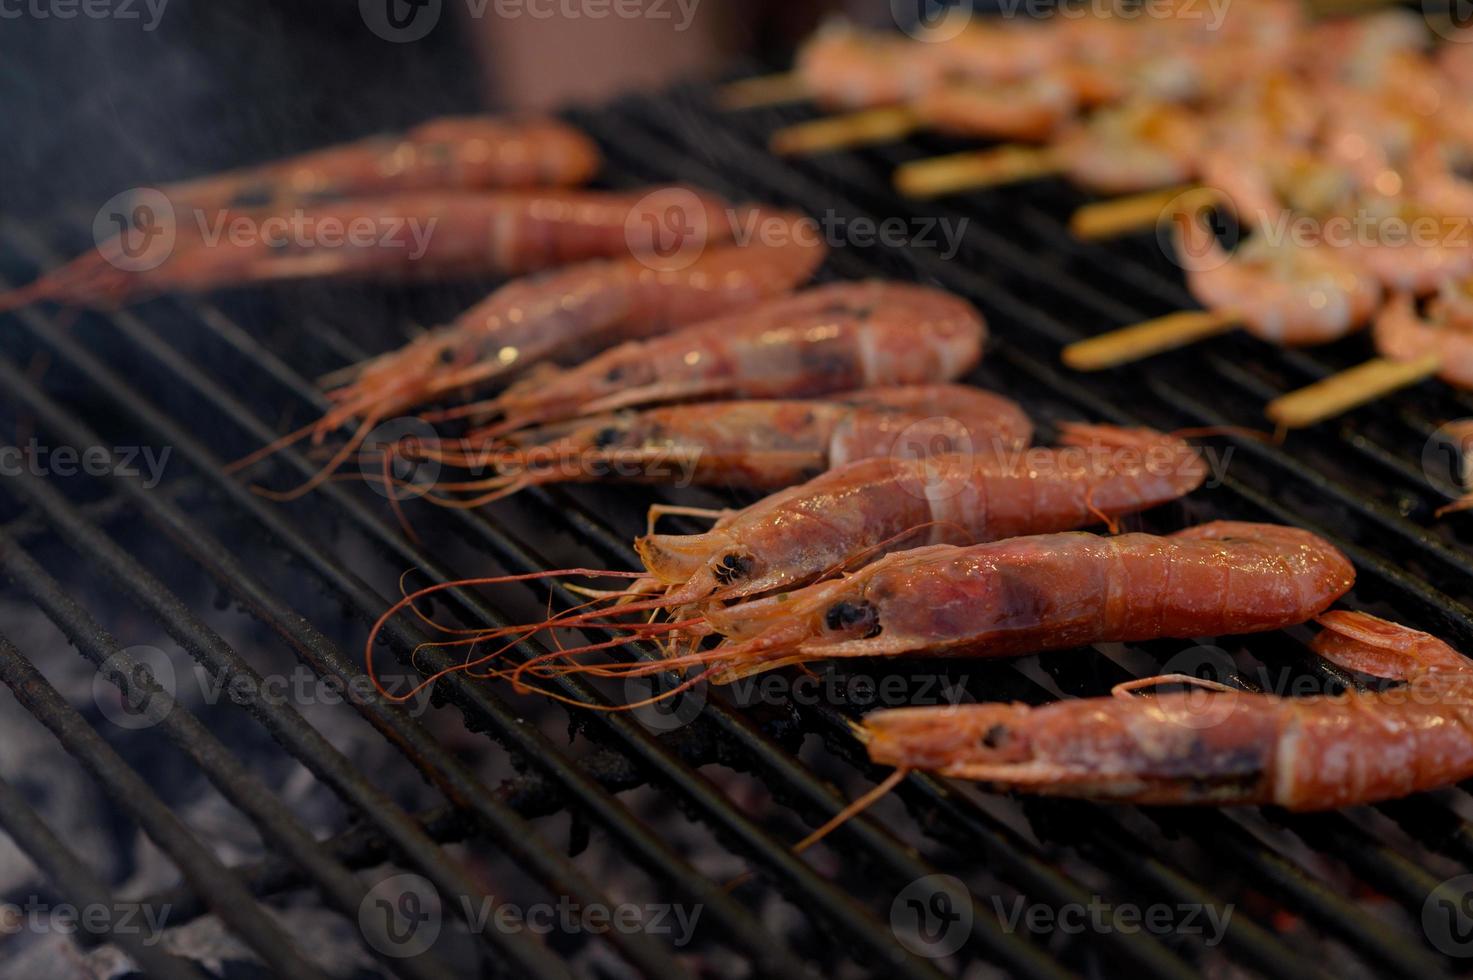 Grilled shrimp at the street food festival. photo